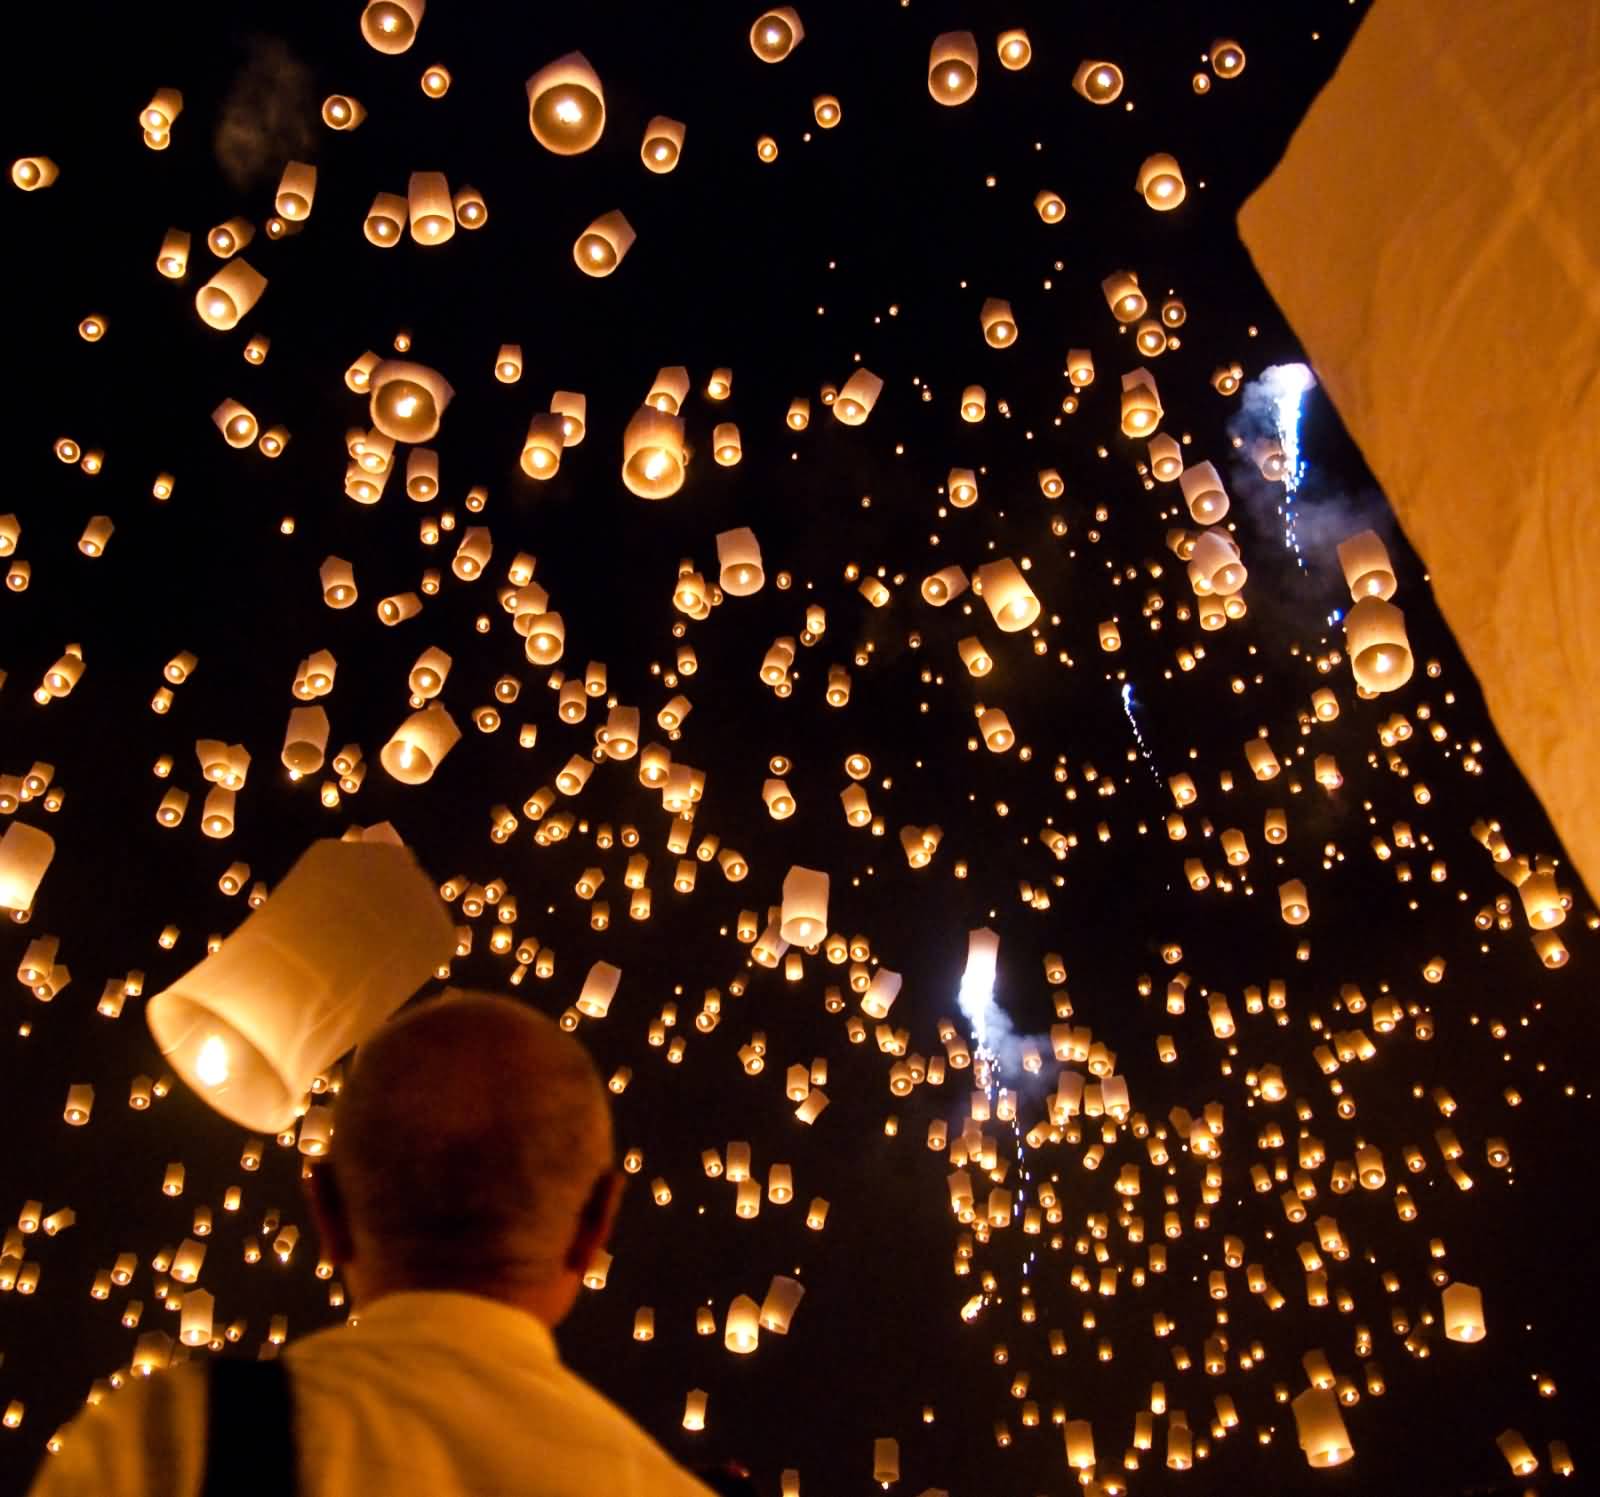 Sky Covered With Beautiful Lanterns On Yi Peng Festival